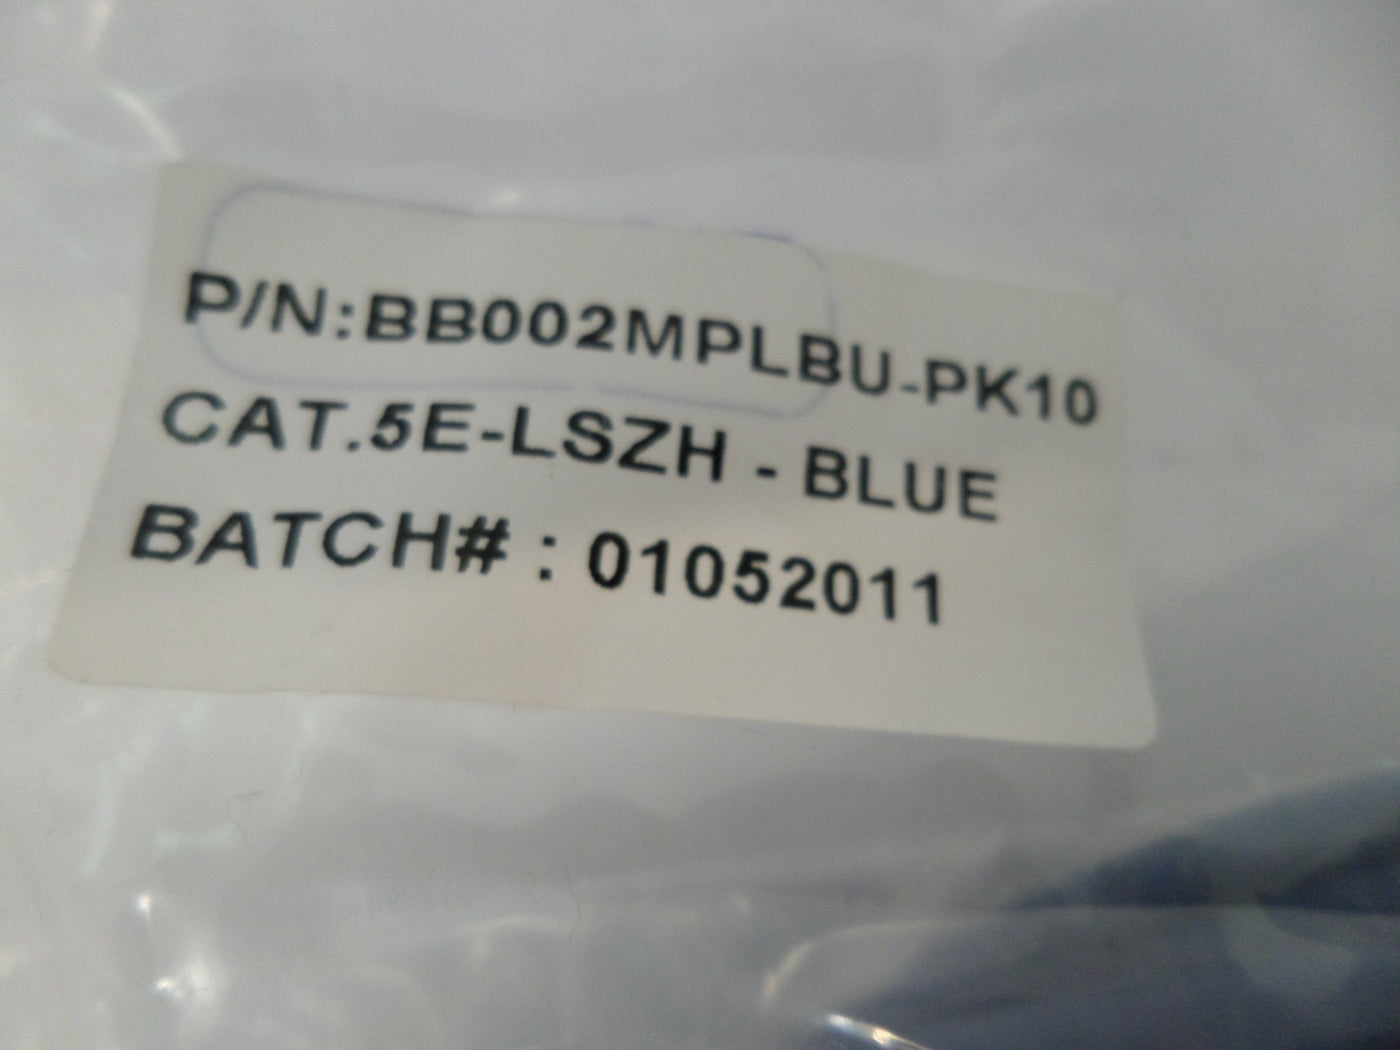 PR25582_BB002MPLBU_Excel CAT5.e Blue 2.0m Patch Cable (Pack of 10) - Image3